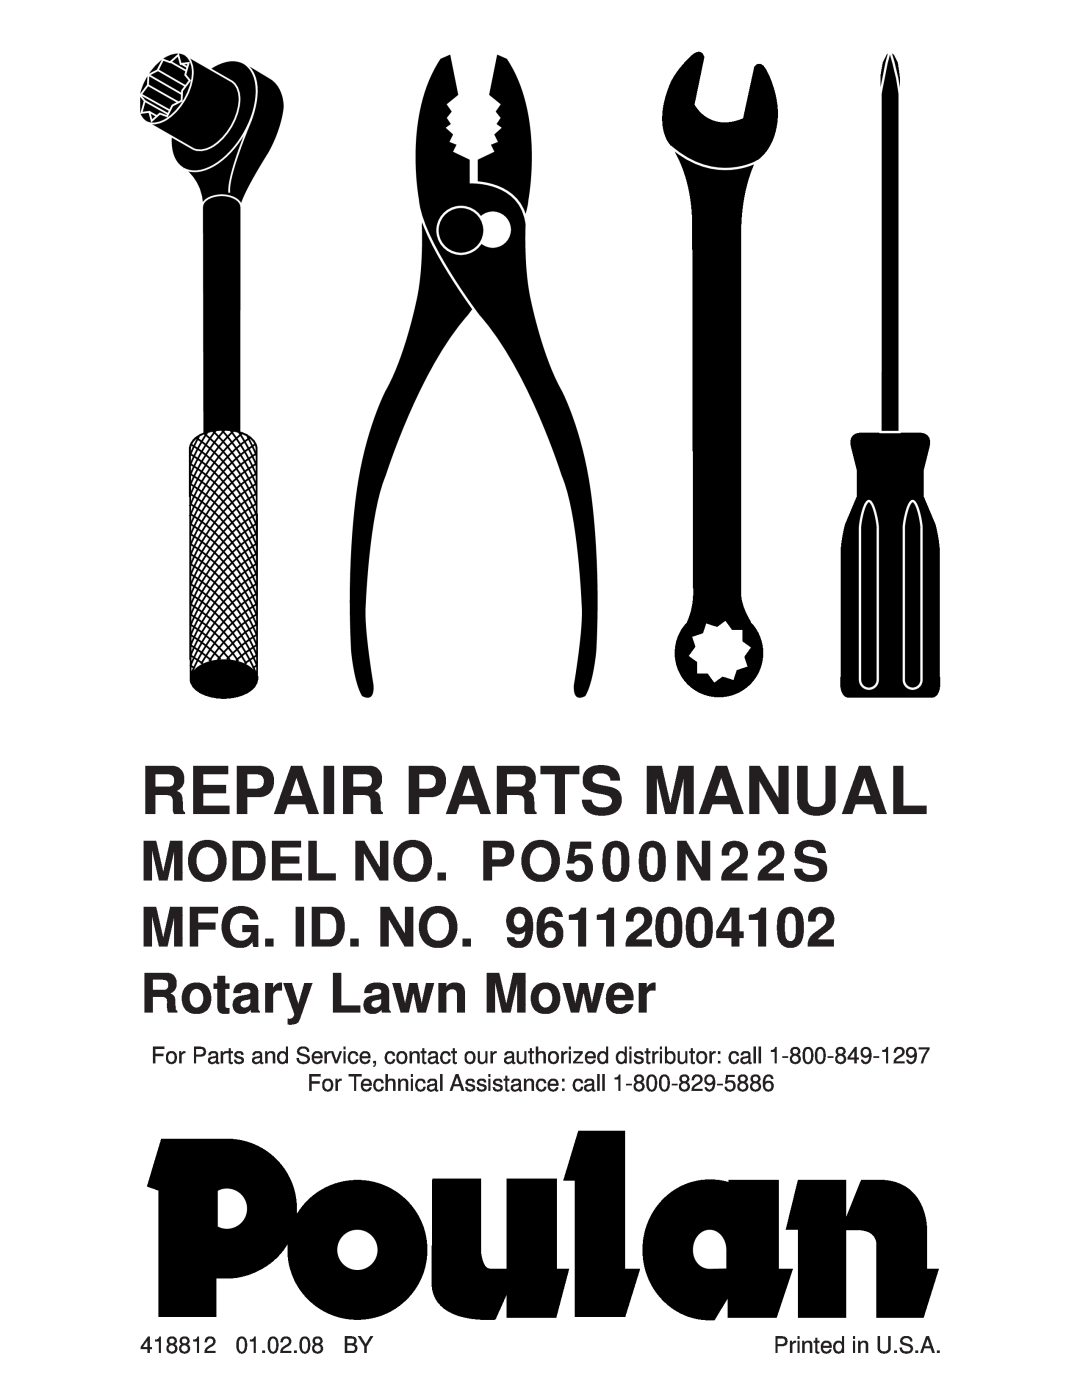 Poulan PO500N22S manual For Technical Assistance call, 418812 01.02.08 BY, Repair Parts Manual 